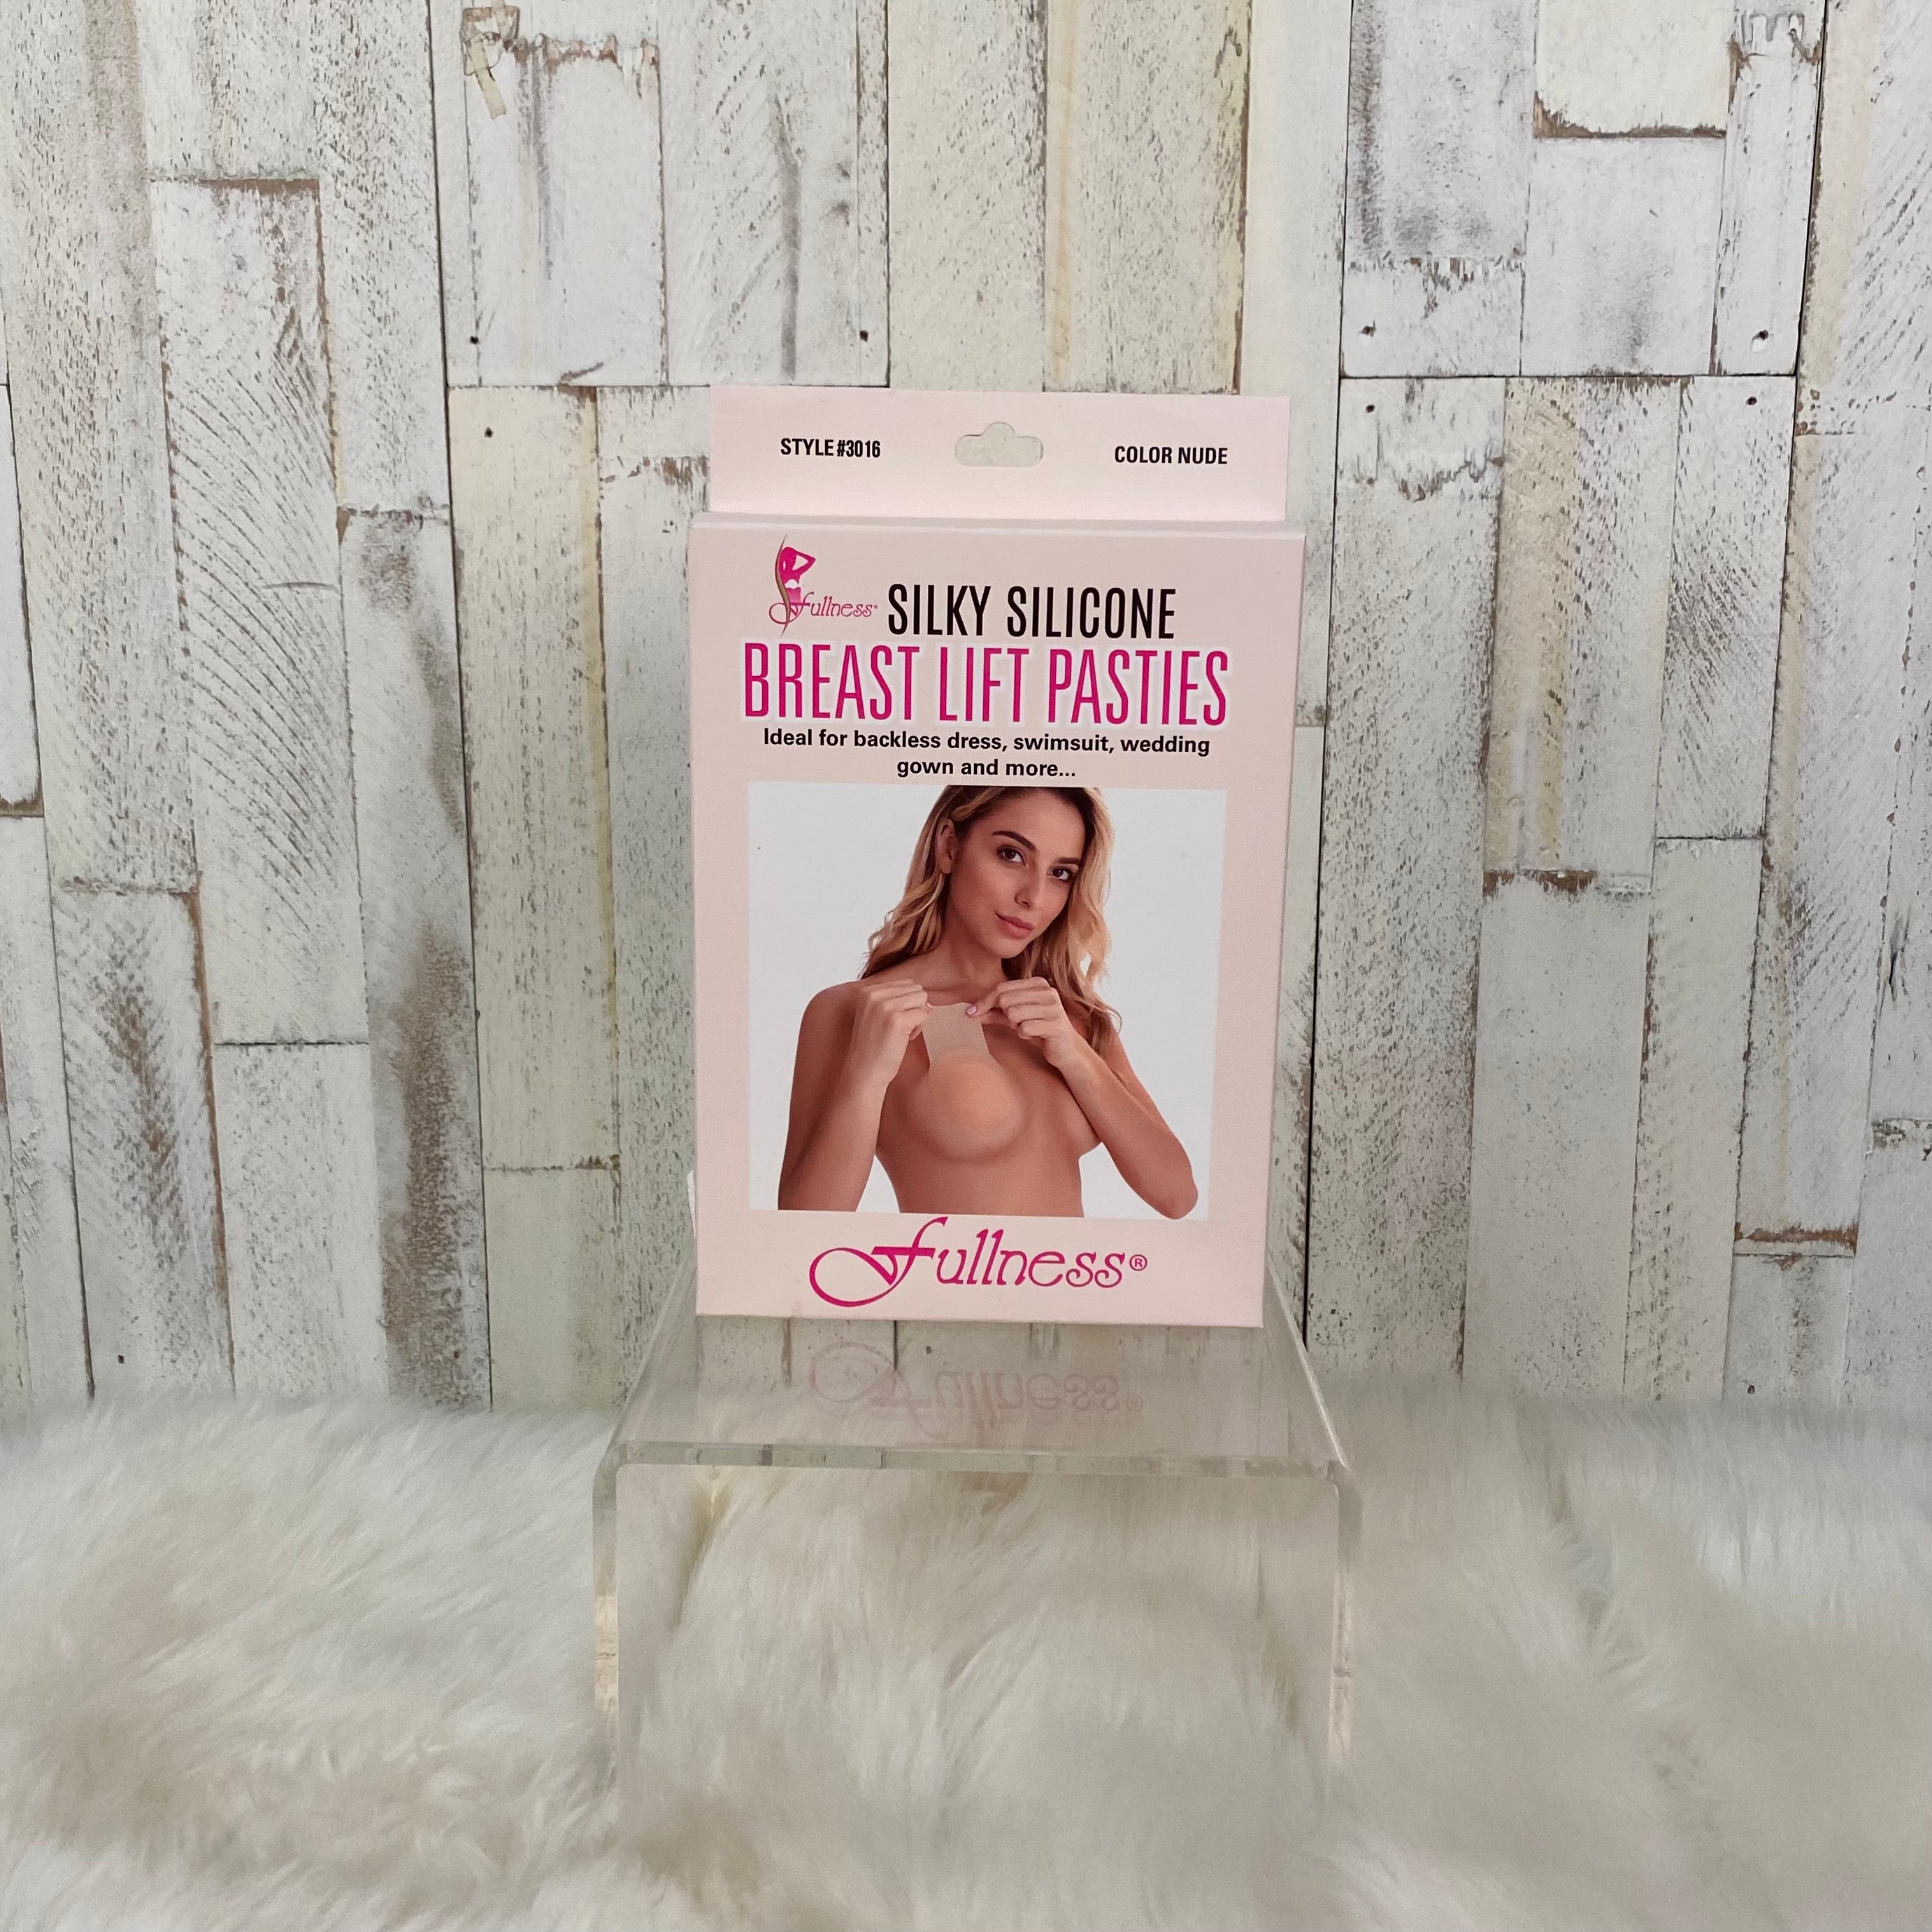 Silky Silcone Breast Lift Pasties